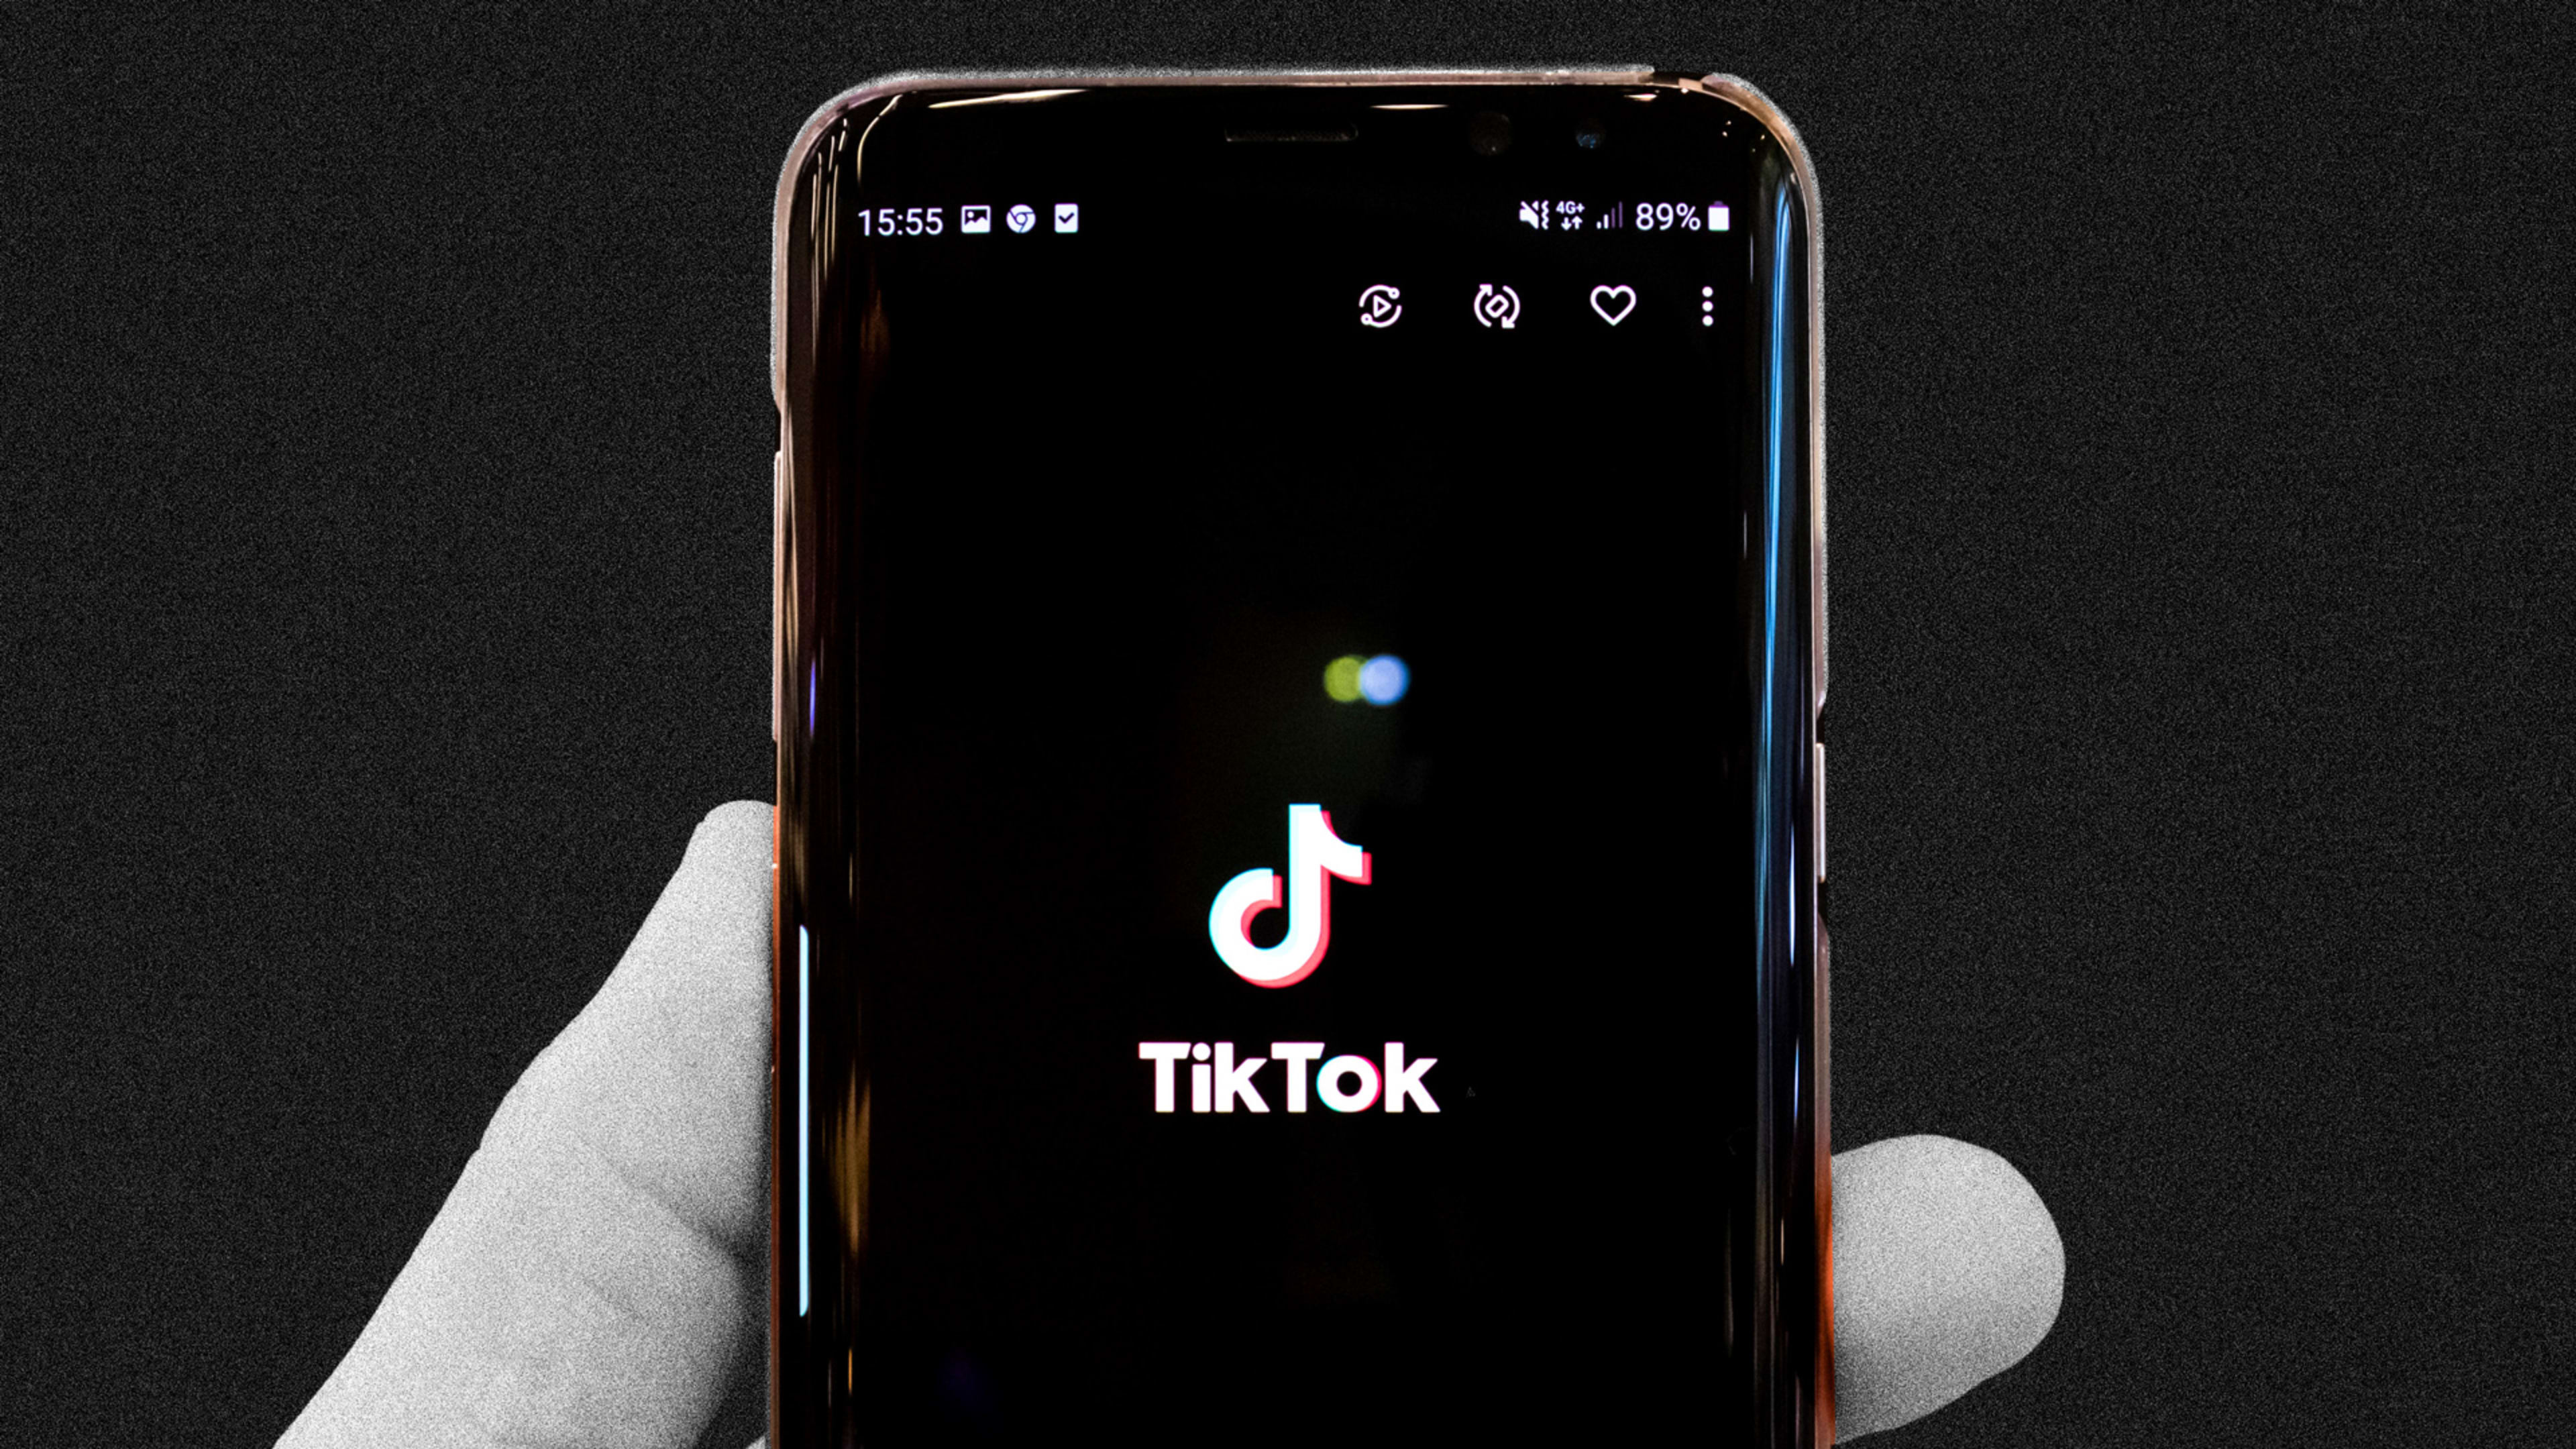 If you value your privacy, don’t use ‘Log in with Tik Tok’